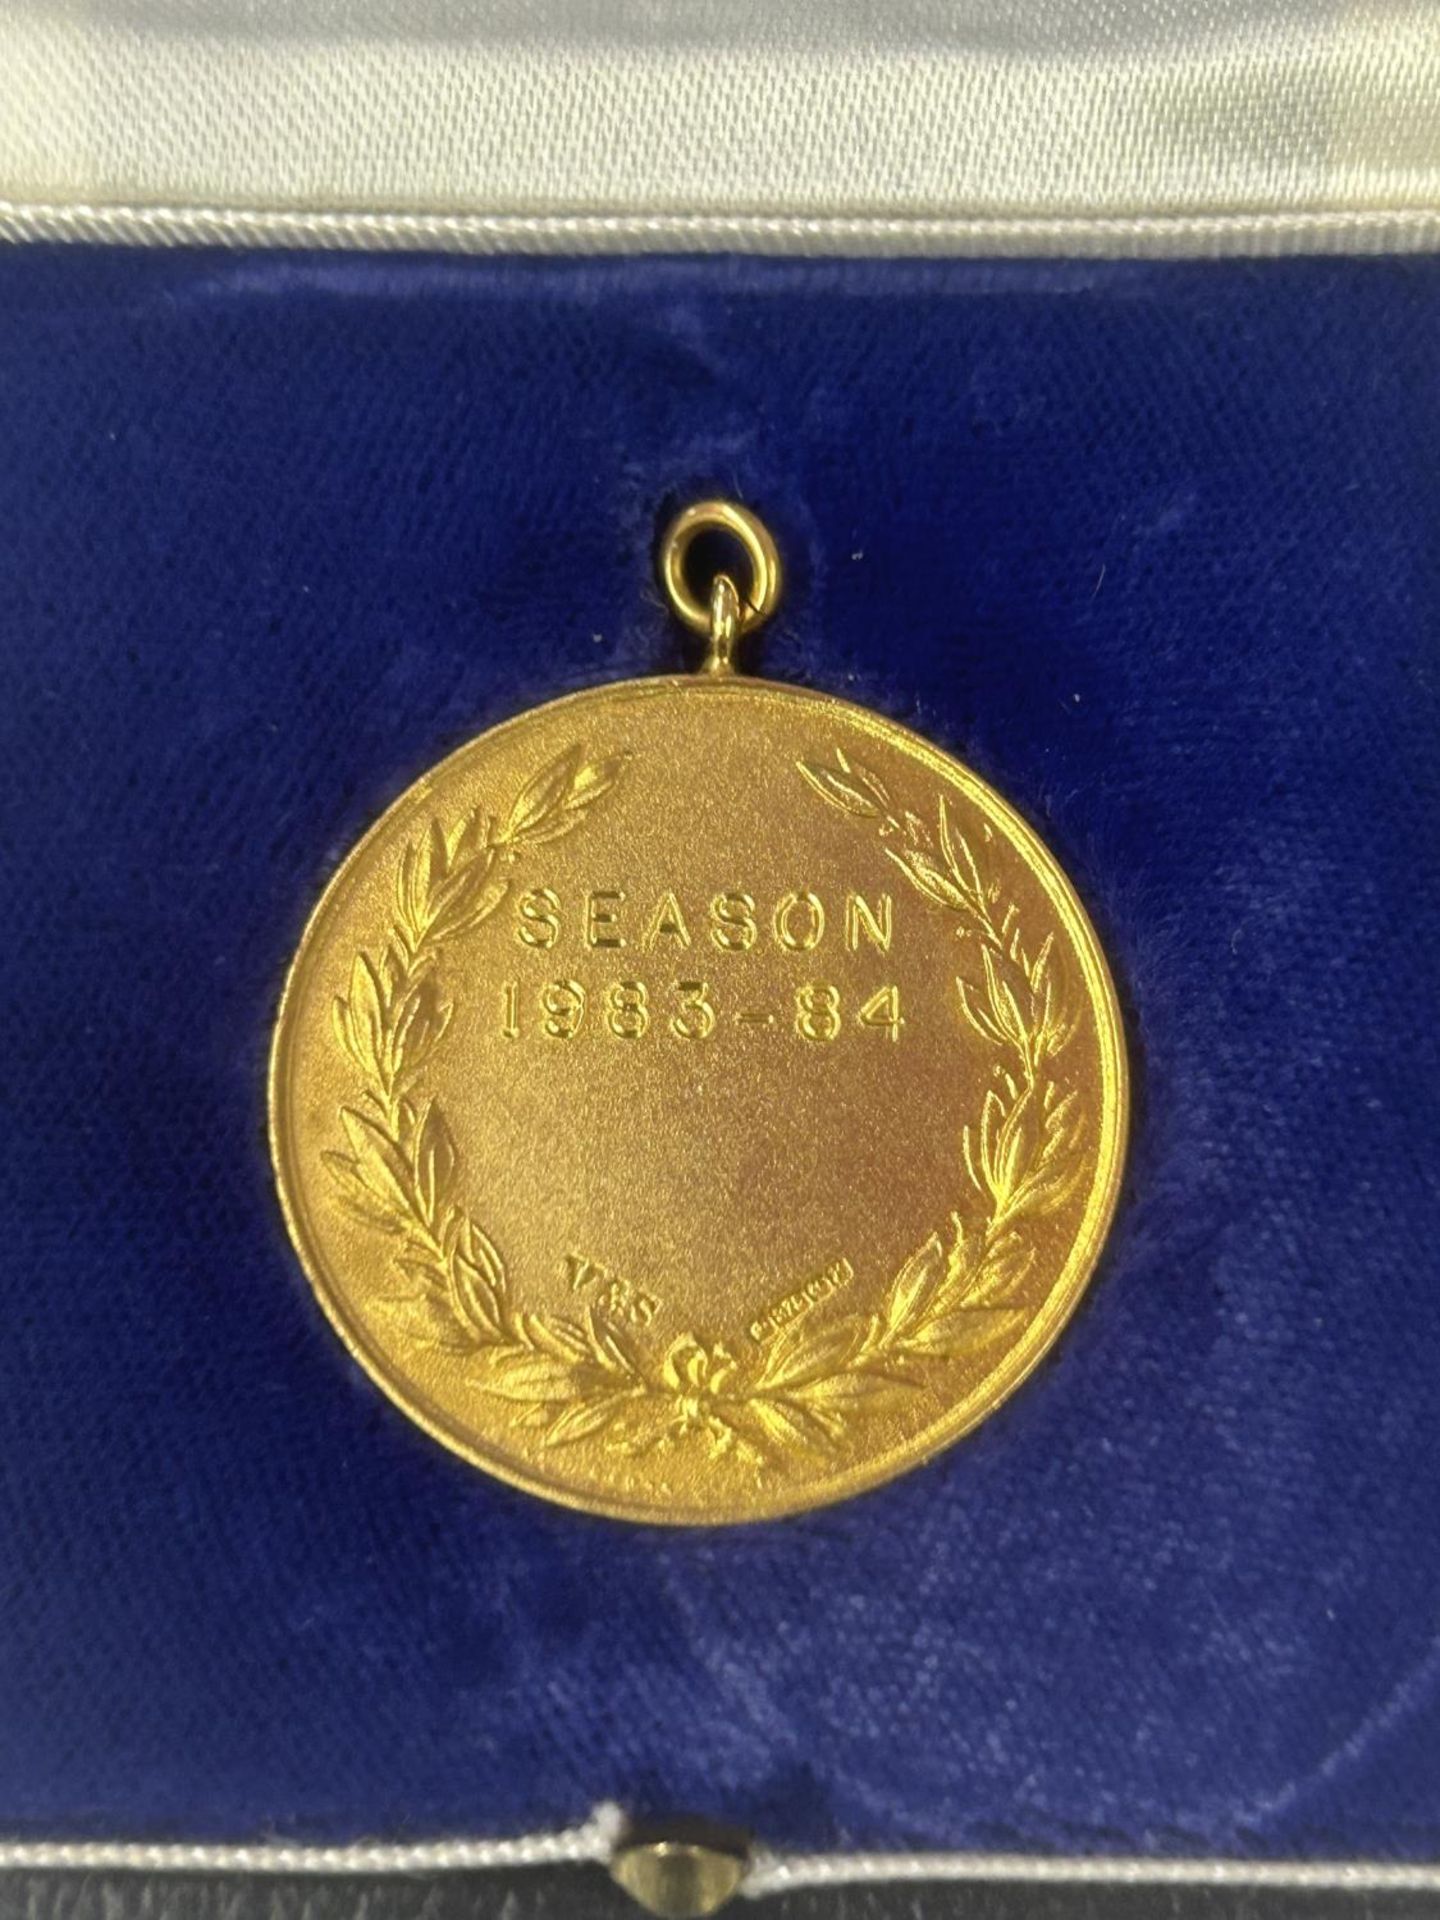 A HALLMARKED 9 CARAT GOLD & ENAMEL FOOTBALL LEAGUE CANON DIVISION 3 LEAGUE WINNERS MEDAL 1983-1984 - Image 3 of 5